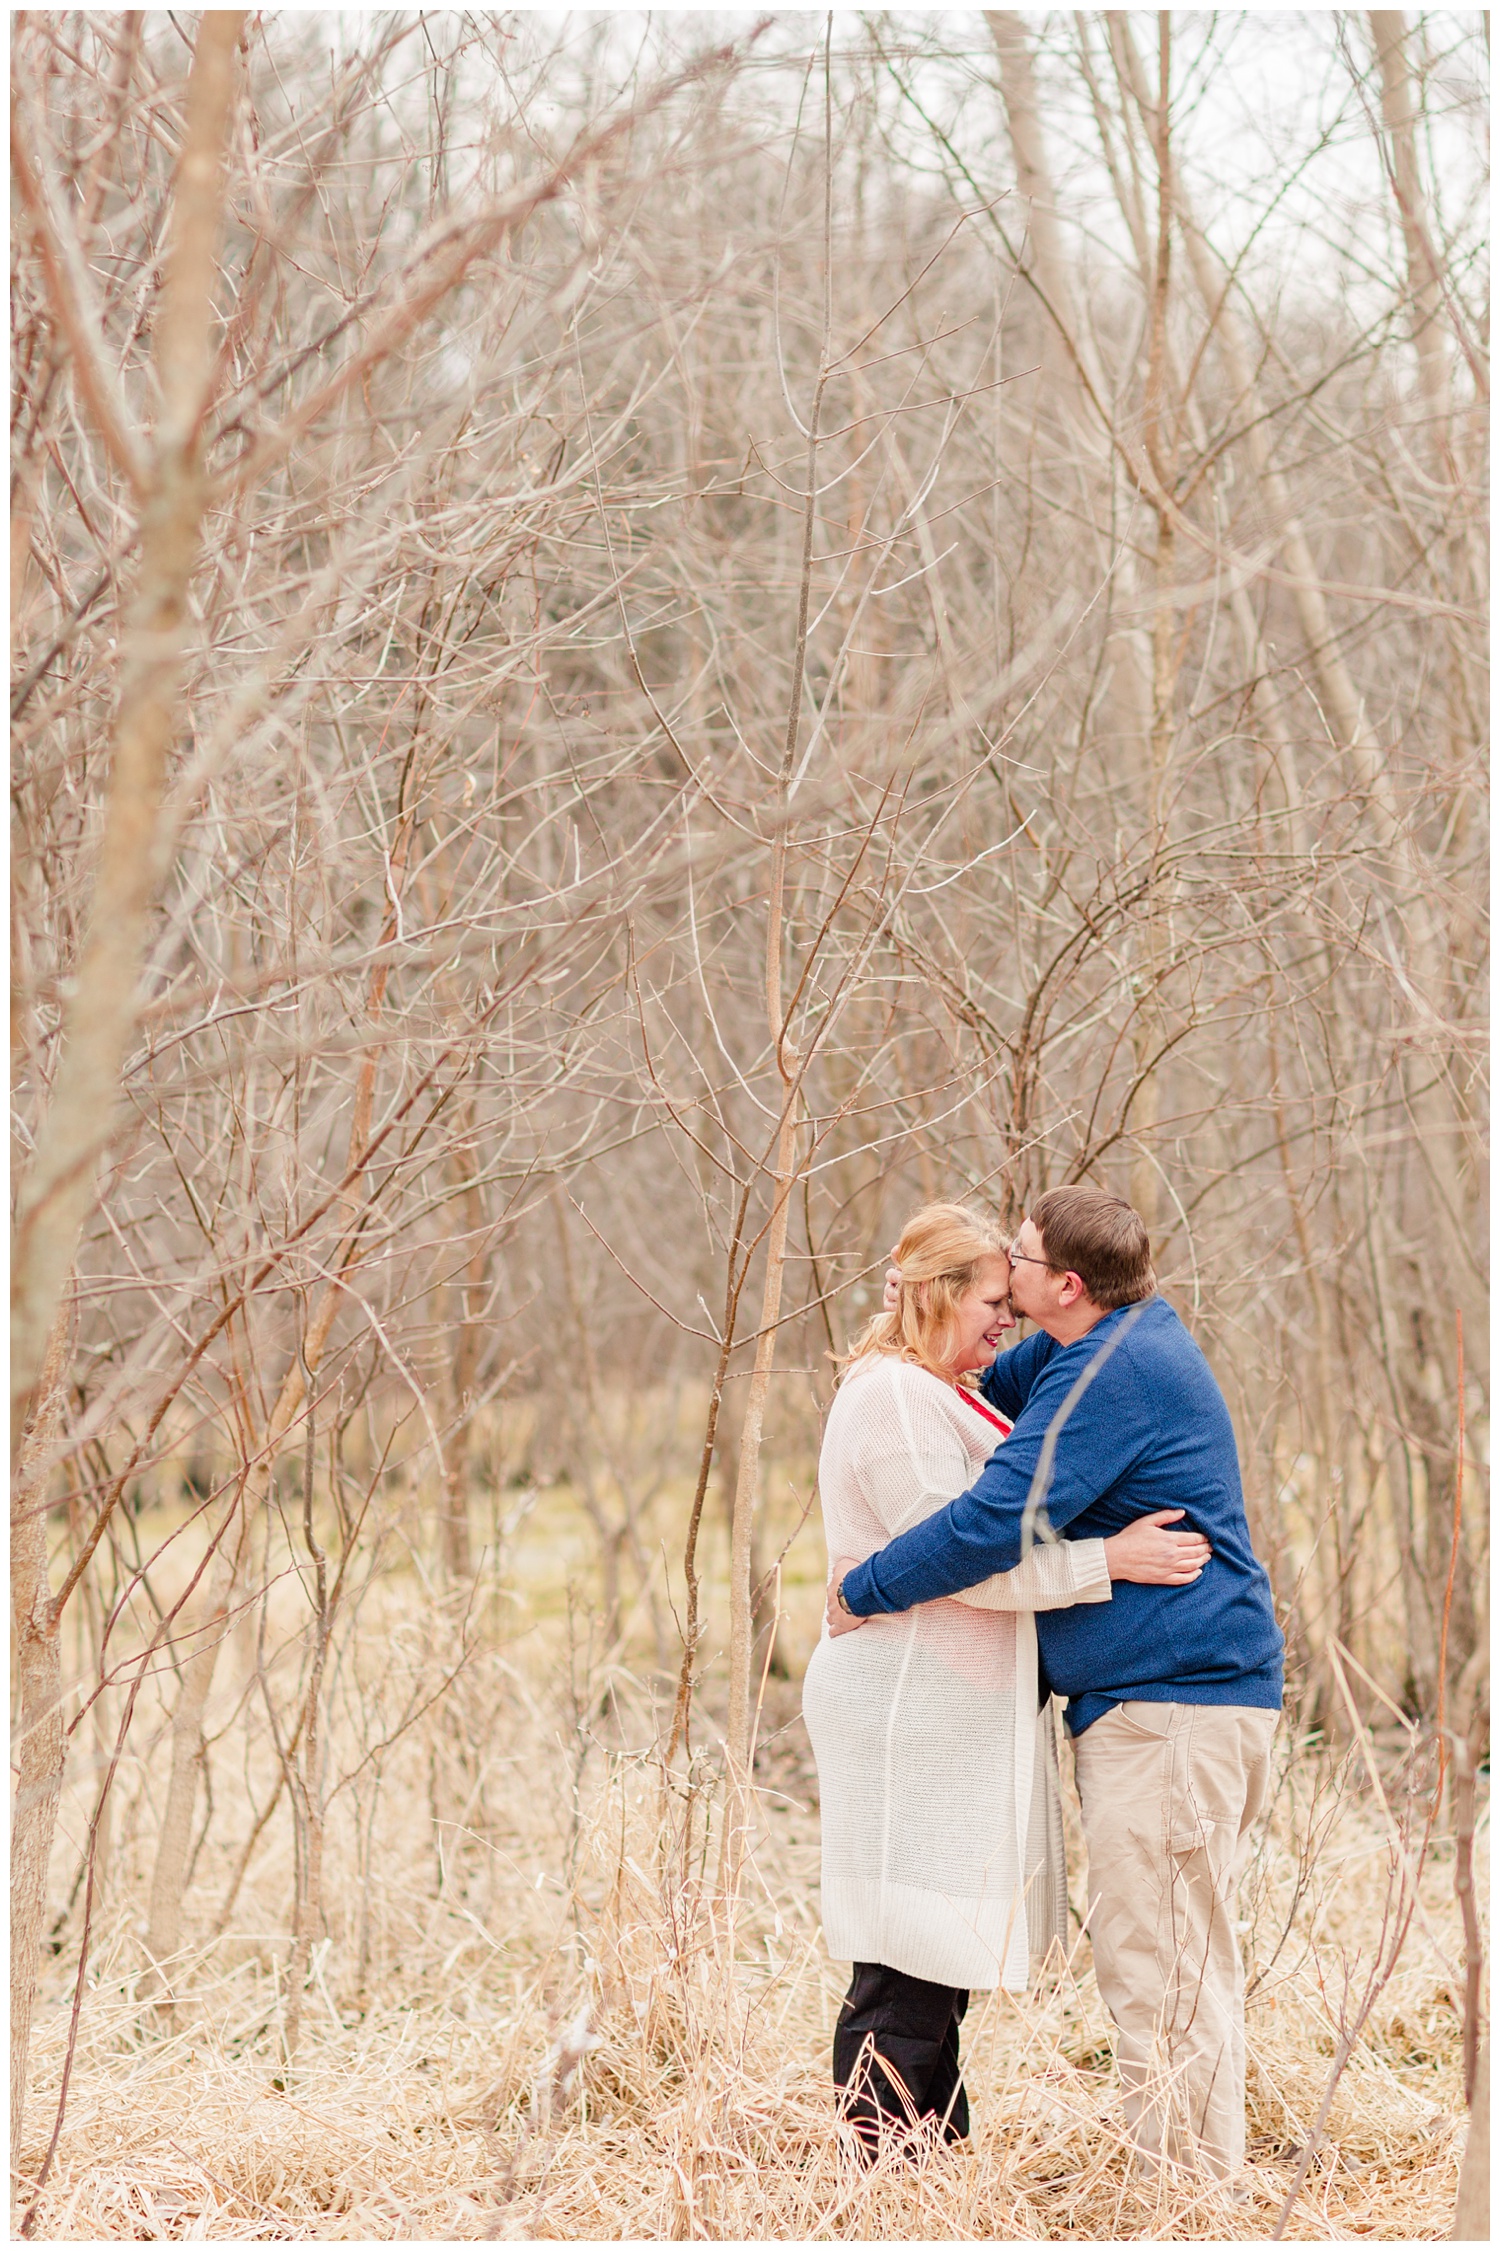 Engagement shoot in a grassy pasture in central Iowa in mid-March surrounded by trees